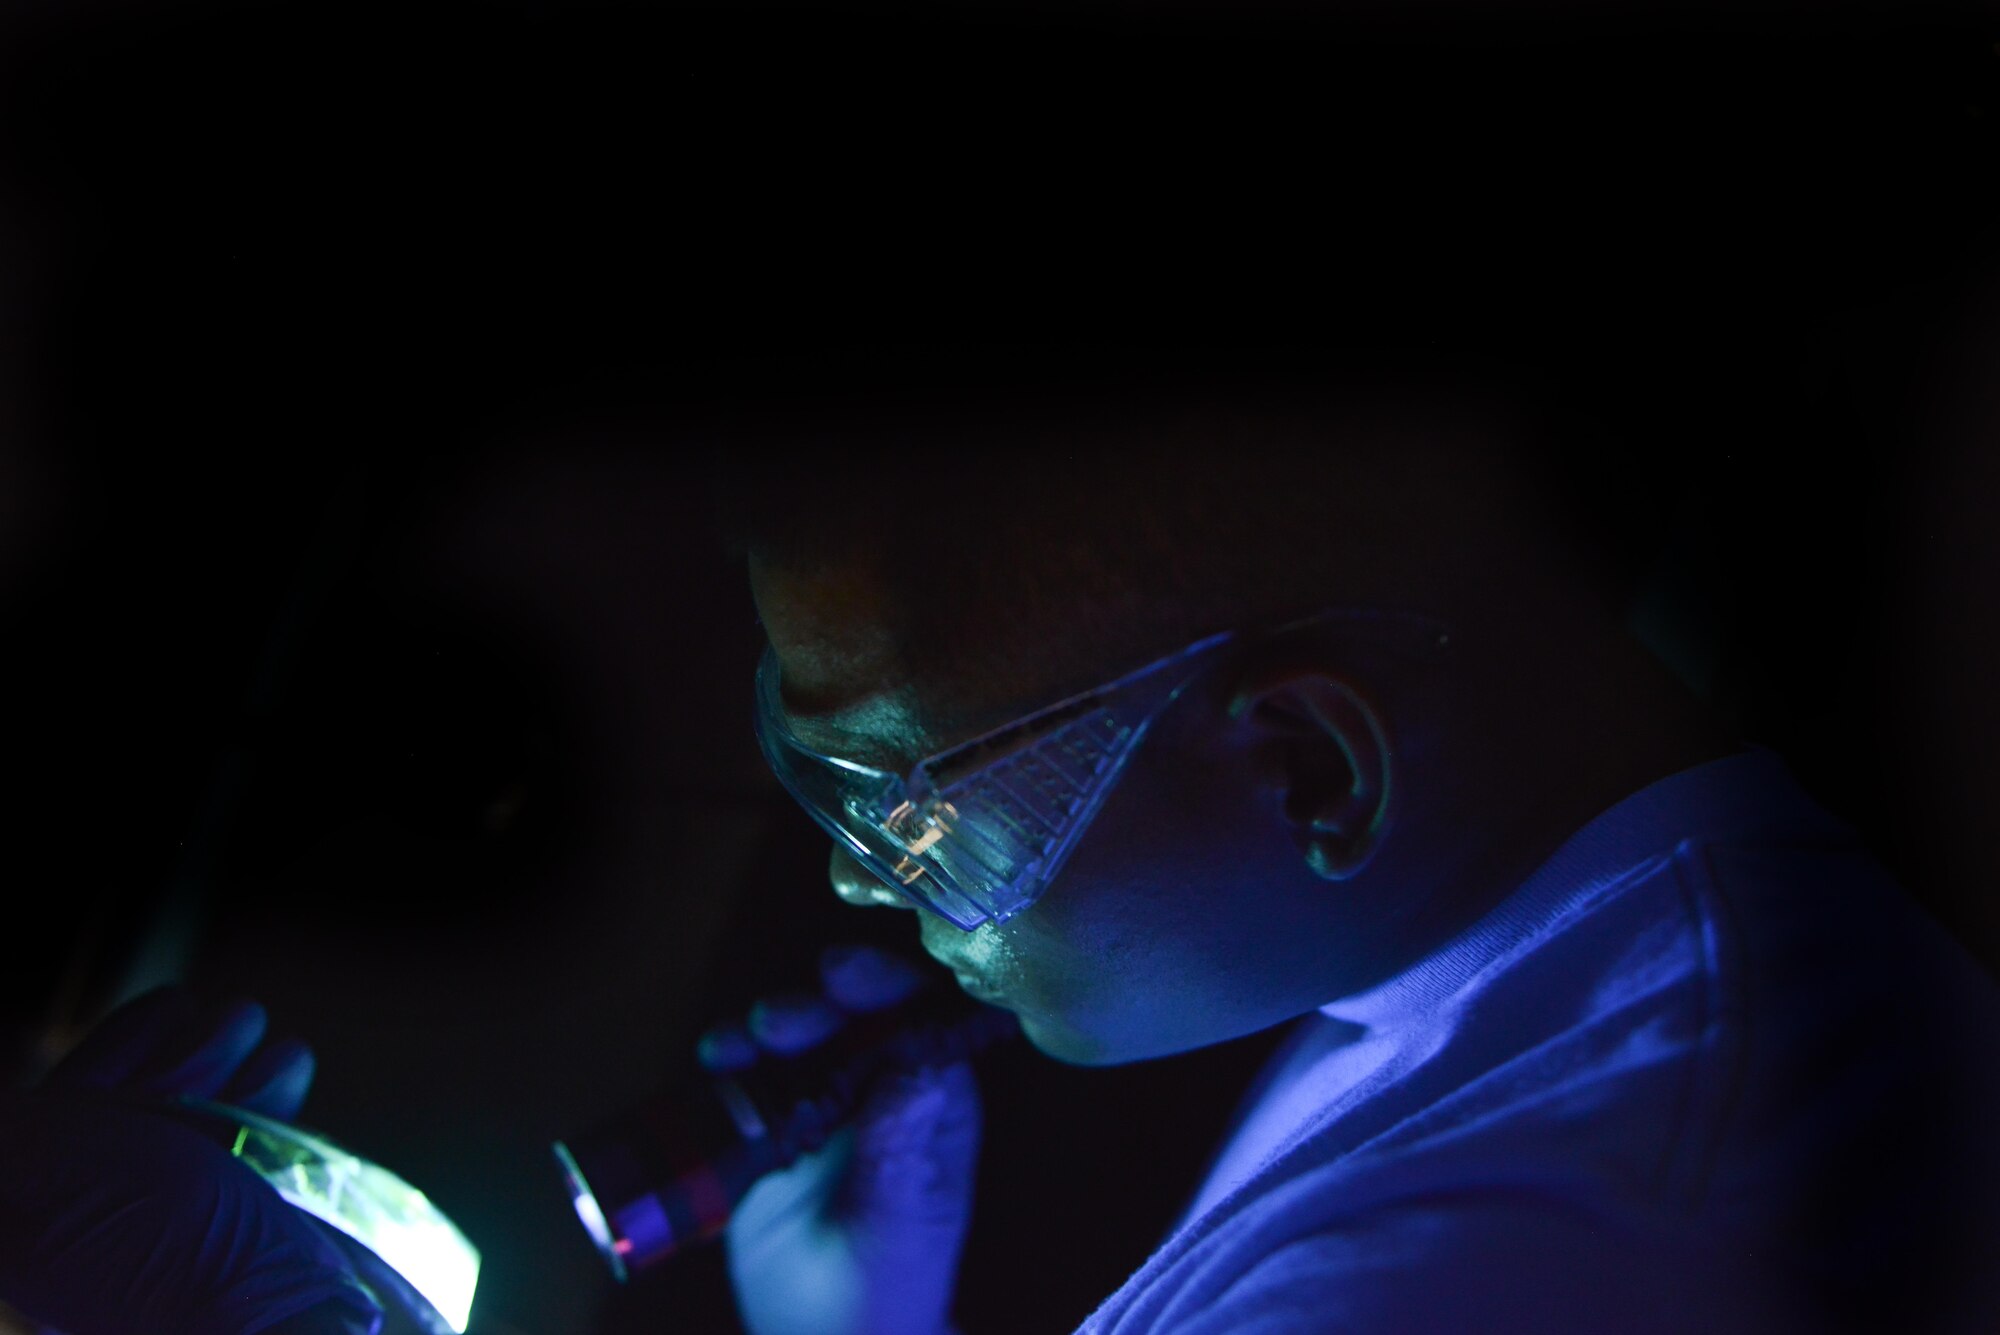 Airman 1st Class Berkeley Lopez, 379th Expeditionary Maintenance Squadron Nondestructive Inspection laboratory, uses a black light to inspect an F-16 Fighting Falcon brake caliper for fractures August 12, 2015 at Al Udeid Air Base, Qatar. NDI Airmen inspect for cracks and flaws on aircraft and their components, aerospace ground equipment and safety equipment.  They also test jet engine oil samples, using a variety of methods, like magnetic particle, fluorescent penetrant, eddy current, radiography, optical and ultrasonic equipment. (U.S. Air Force photo/Staff Sgt. Alexandre Montes)   